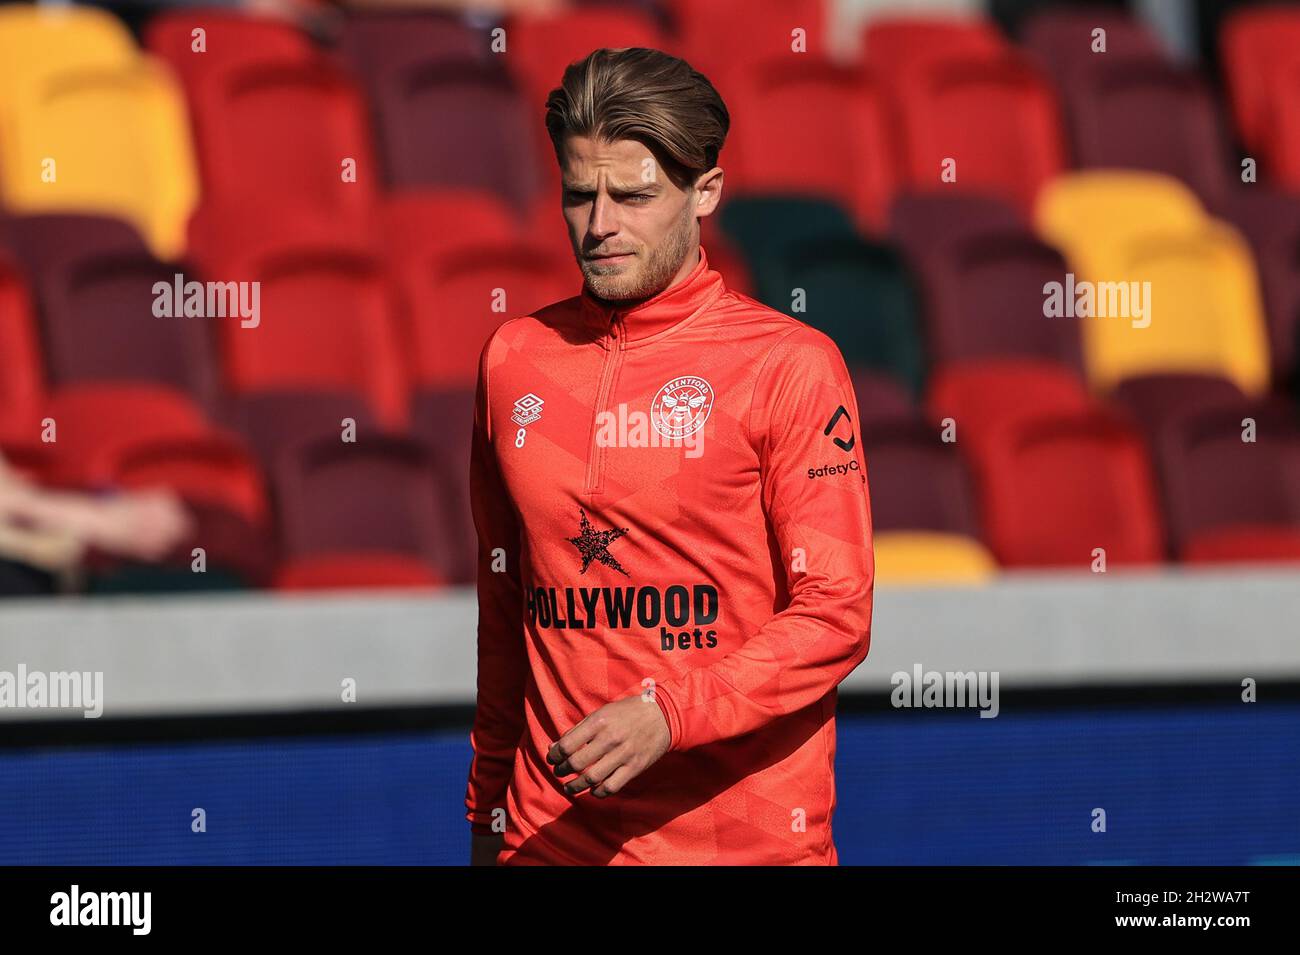 Mathias Jensen #8 of Brentford during the pre-game warmup  in London, United Kingdom on 10/24/2021. (Photo by Mark Cosgrove/News Images/Sipa USA) Stock Photo